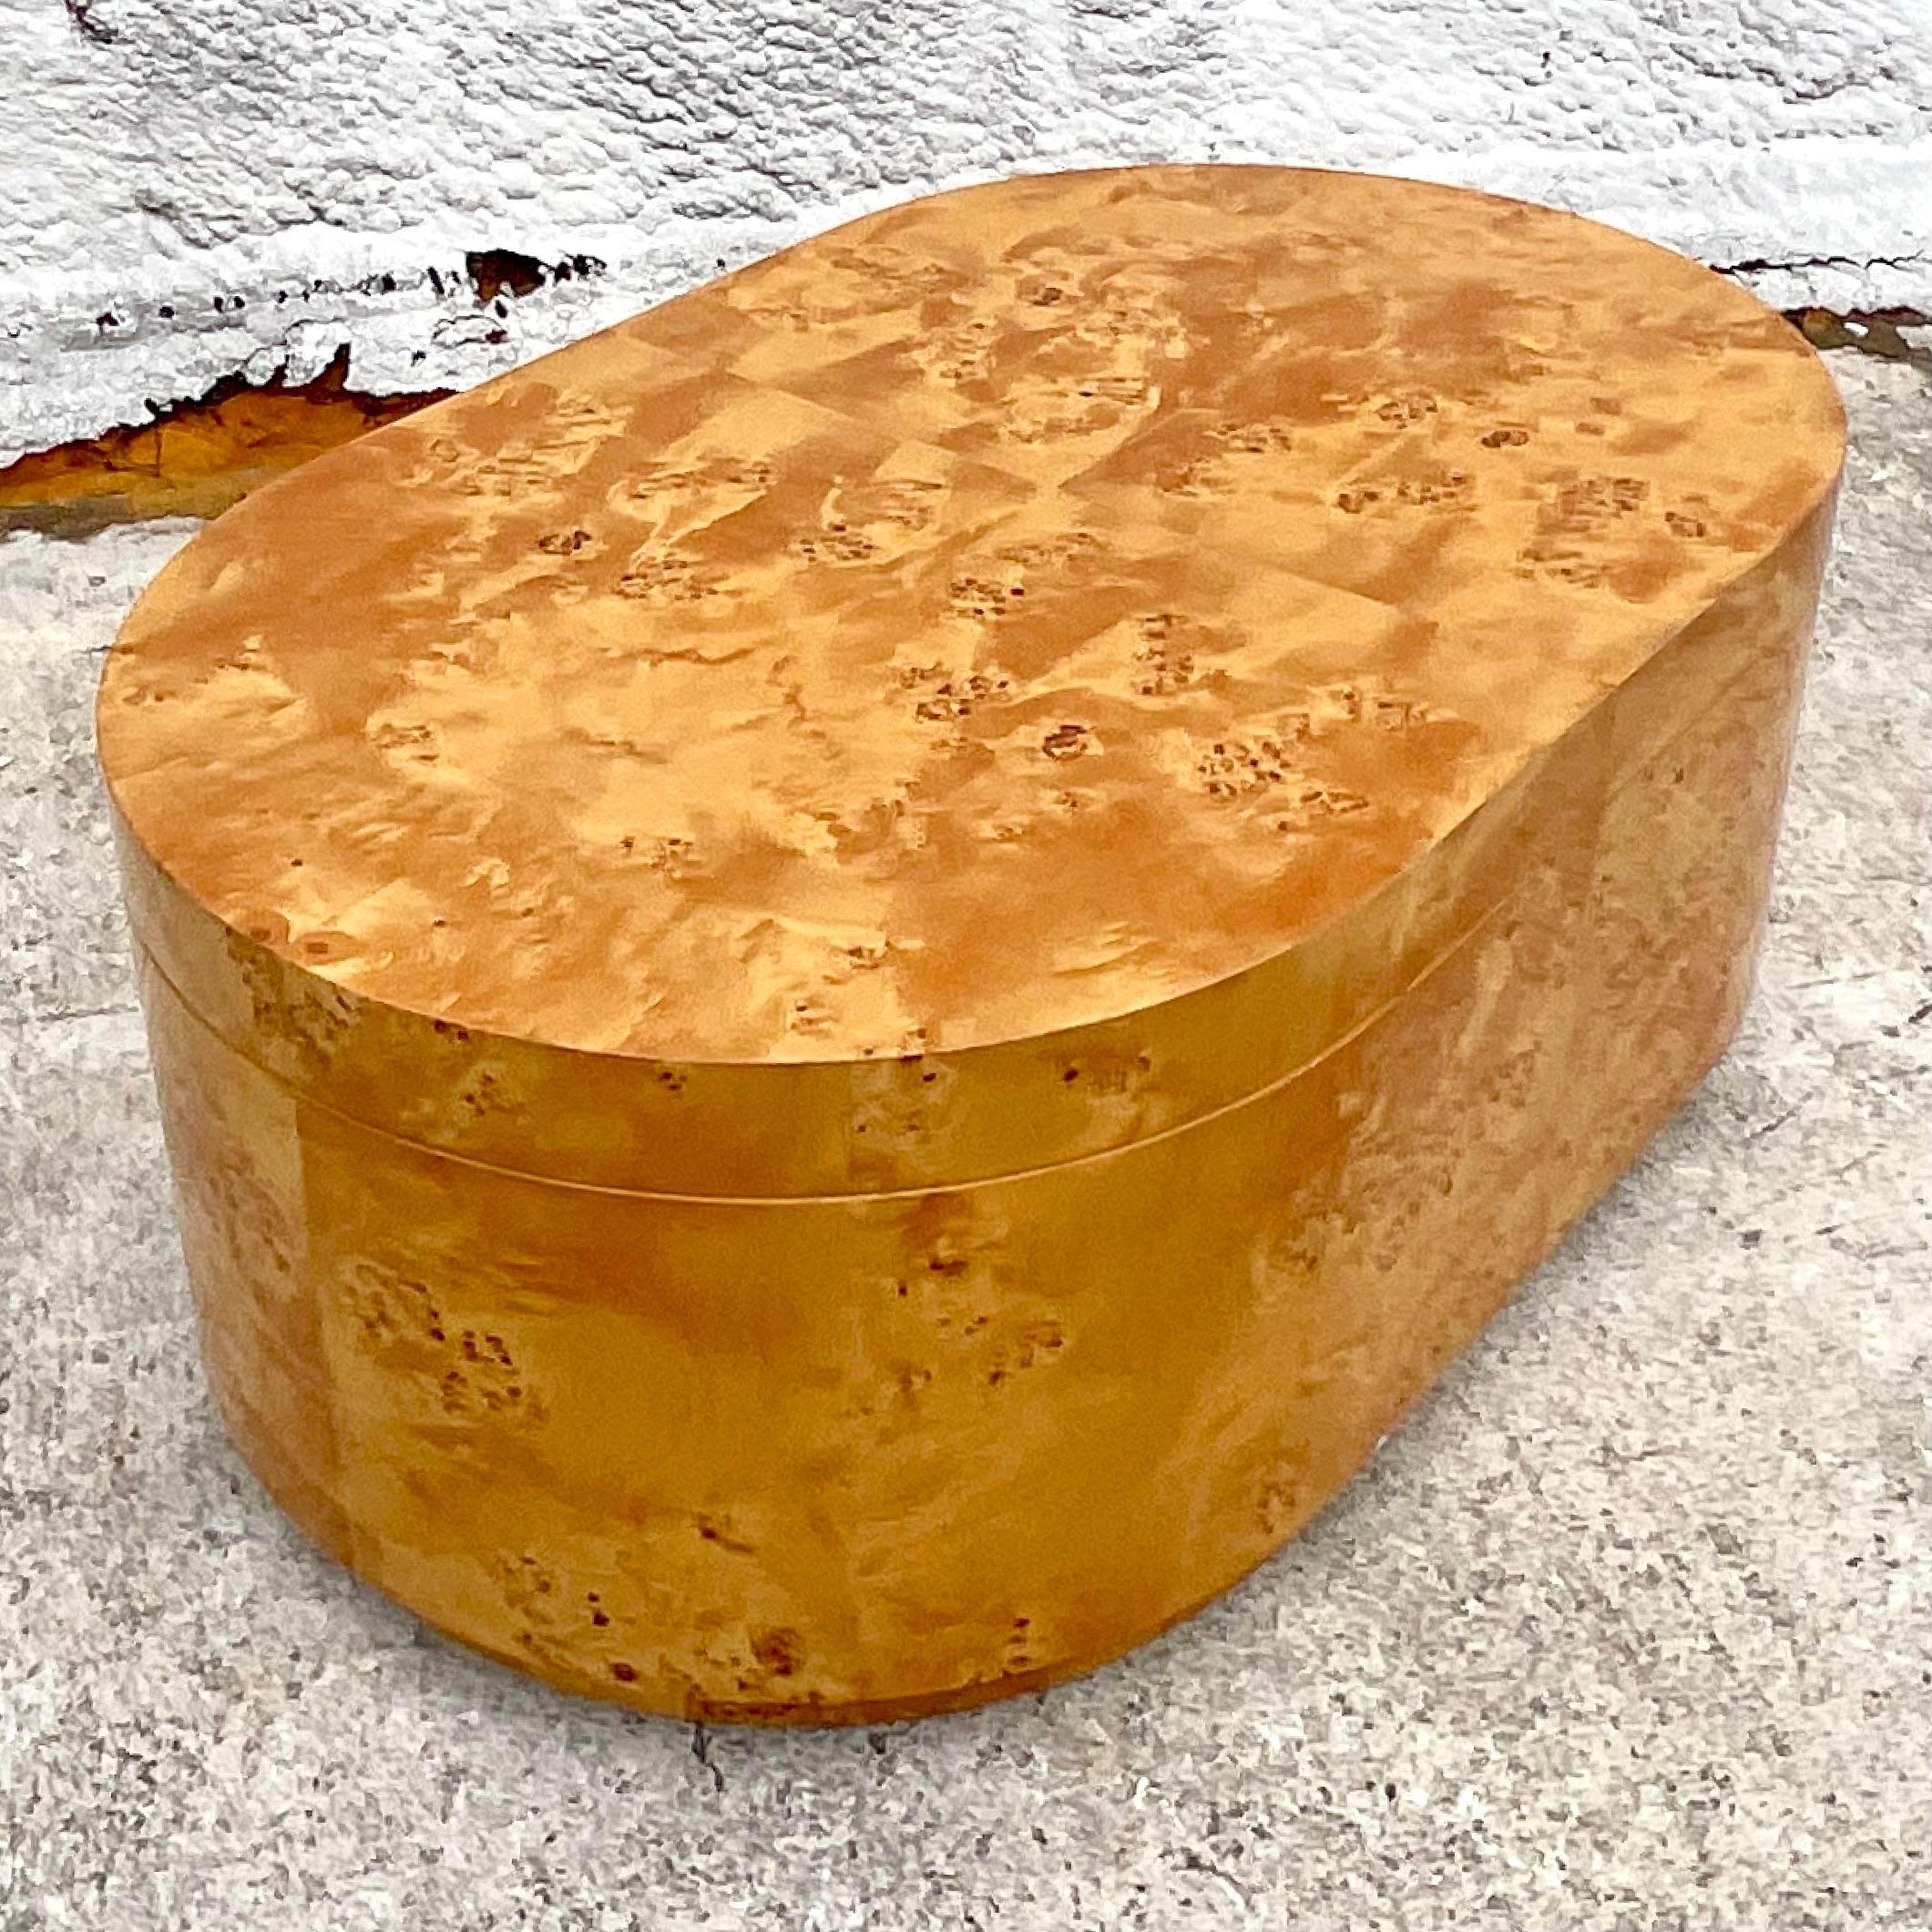 Elevate your living room with this Vintage Boho Custom Burl Wood Storage Coffee Table. Featuring rich burl wood and intricate craftsmanship, it combines bohemian elegance with practical American design. The hidden storage compartment adds